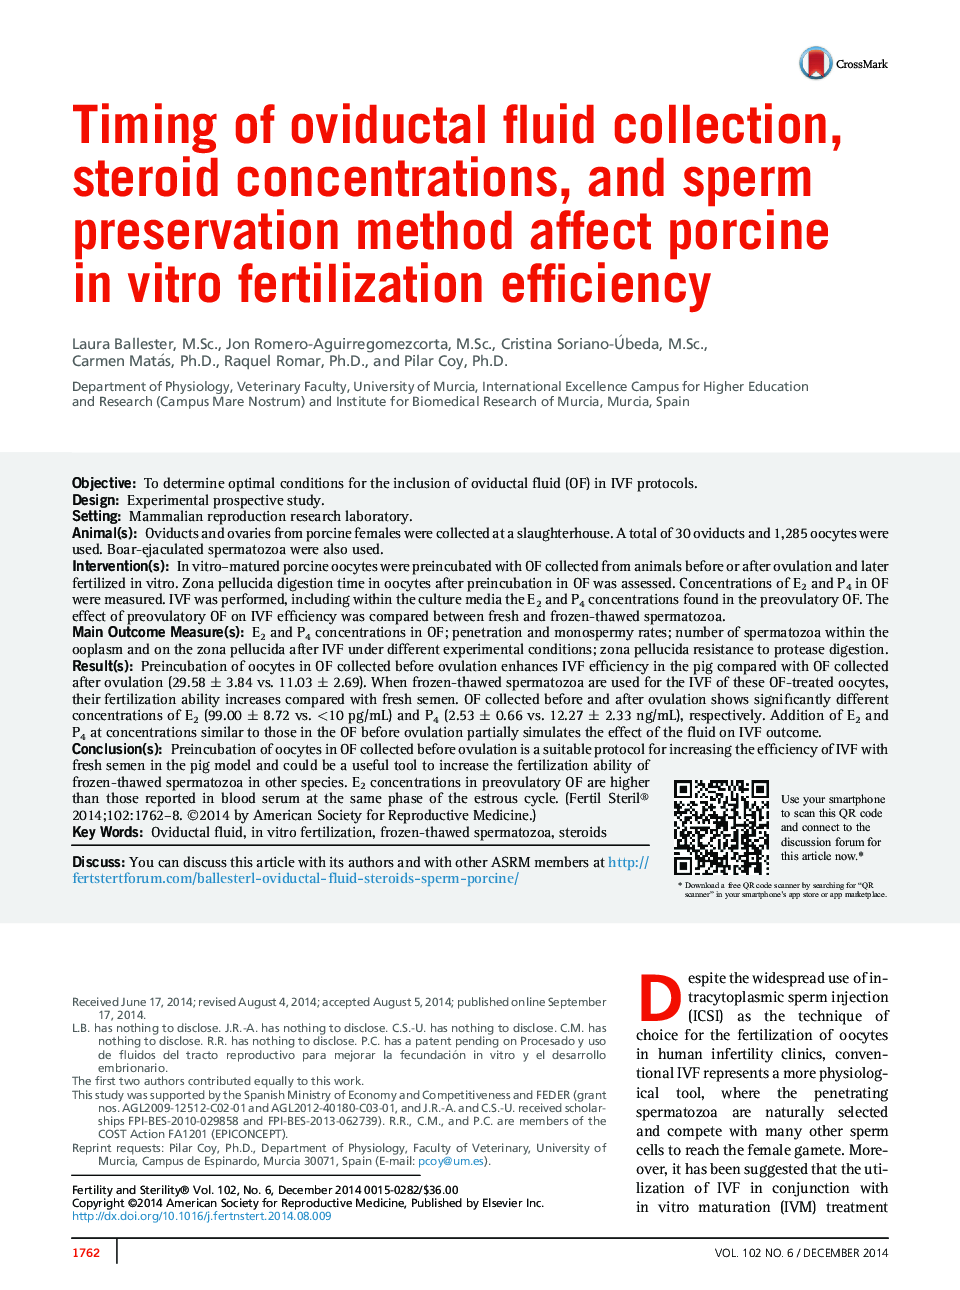 Timing of oviductal fluid collection, steroid concentrations, and sperm preservation method affect porcine inÂ vitro fertilization efficiency